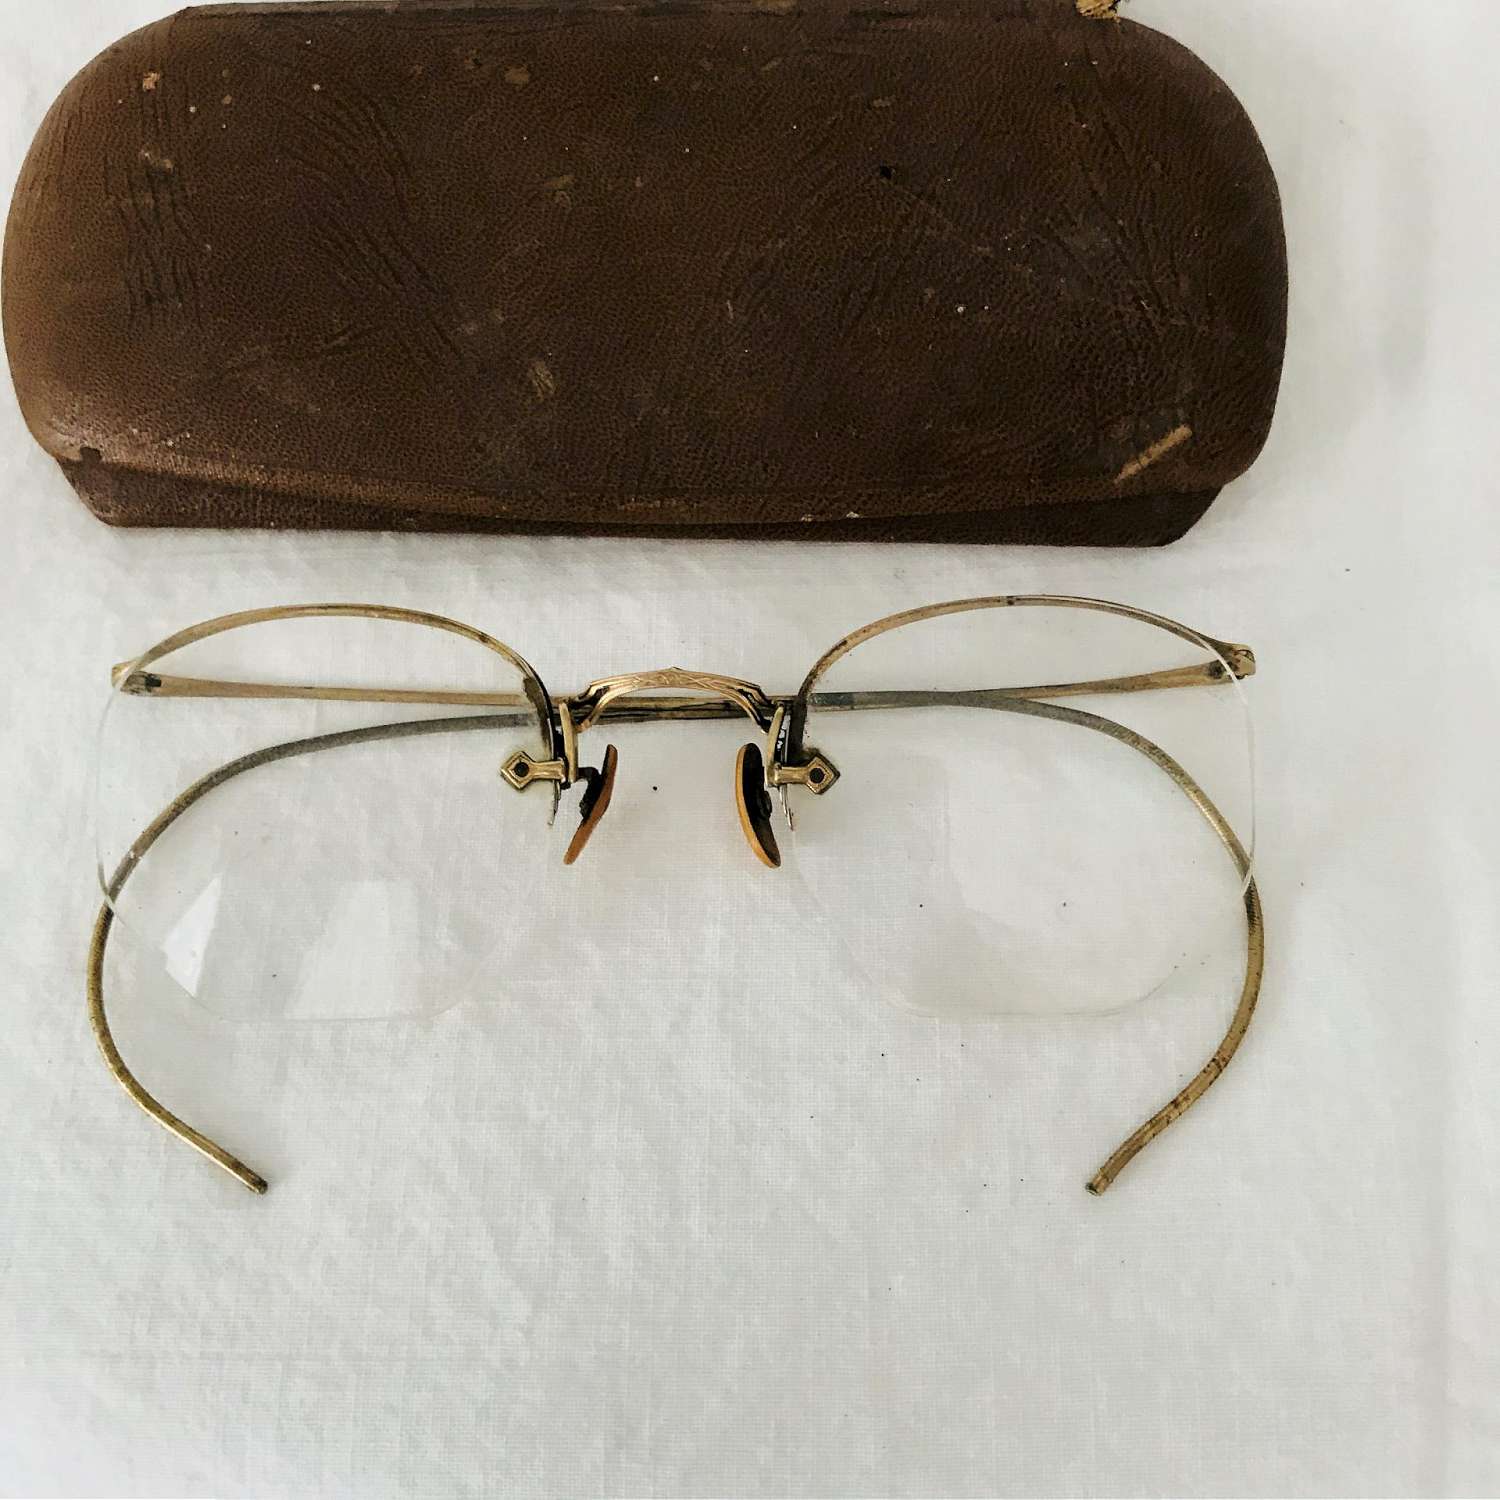 Antique Eyeglasses Gold Wire Rim 10 12k Gold Filled Rims Collectible Display Farmhouse Office